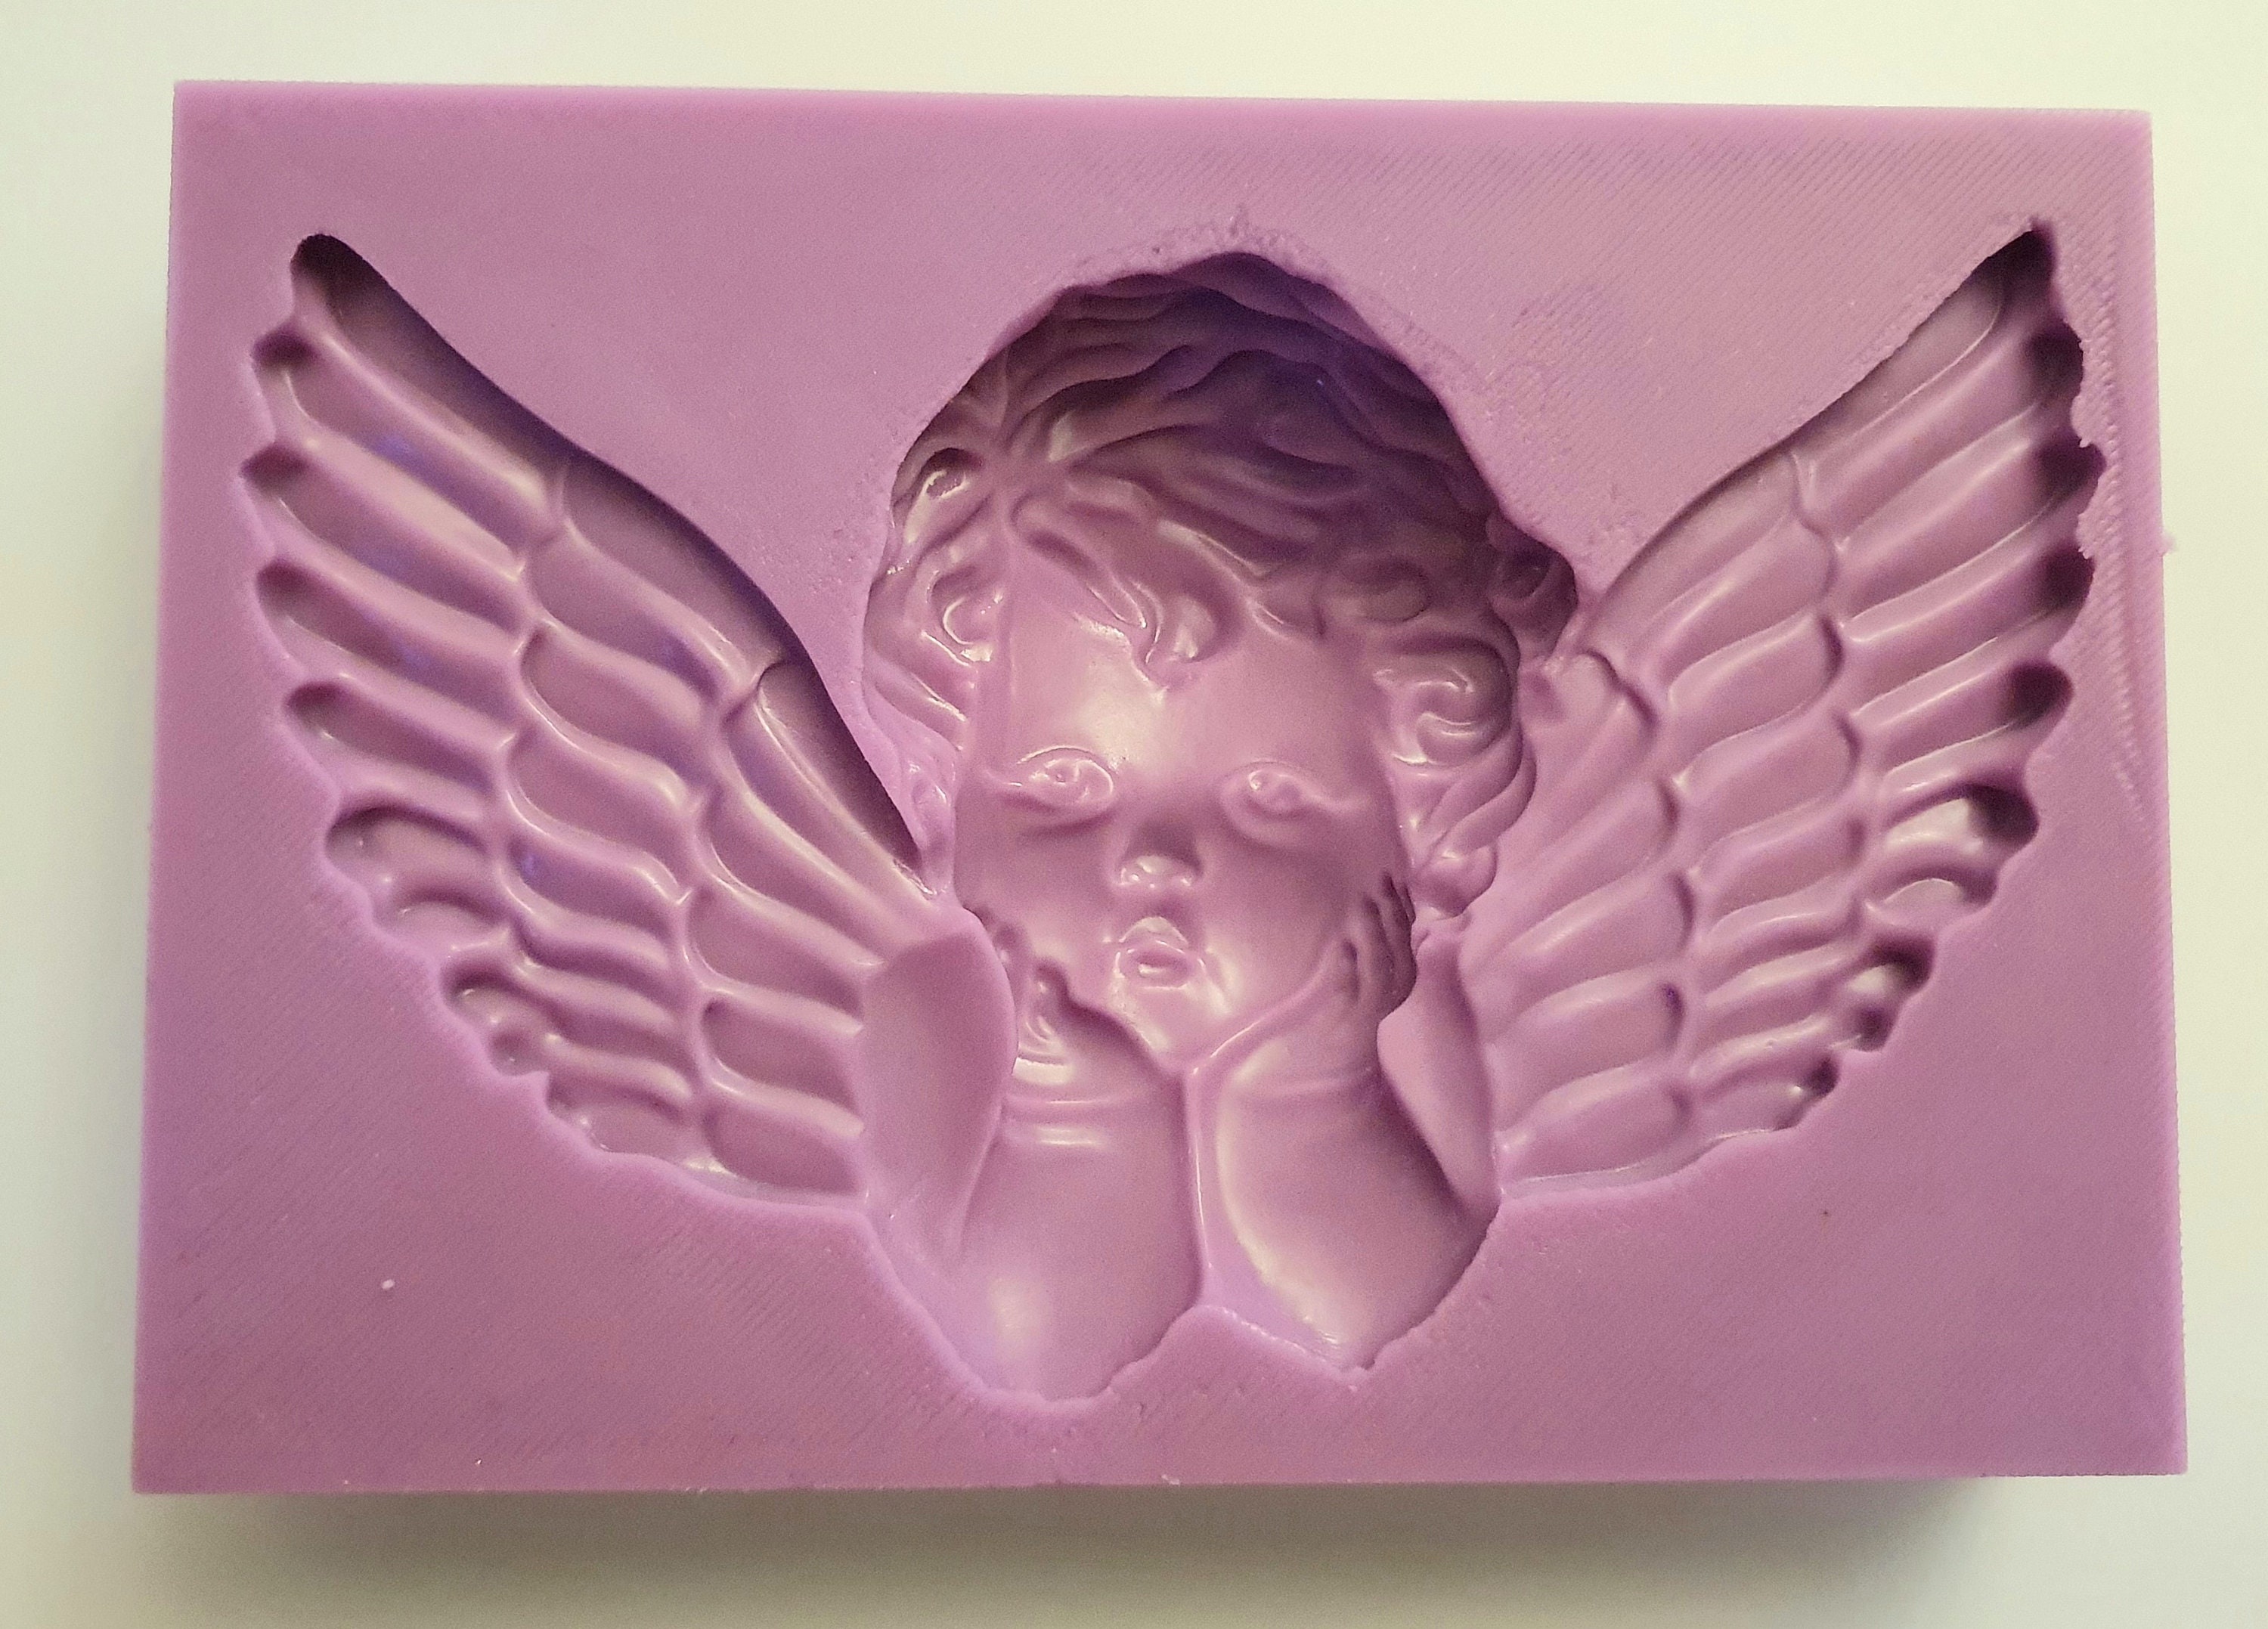 Stampo in silicone angelo per resina Mold stampi formine angeli angel -  RomaLab